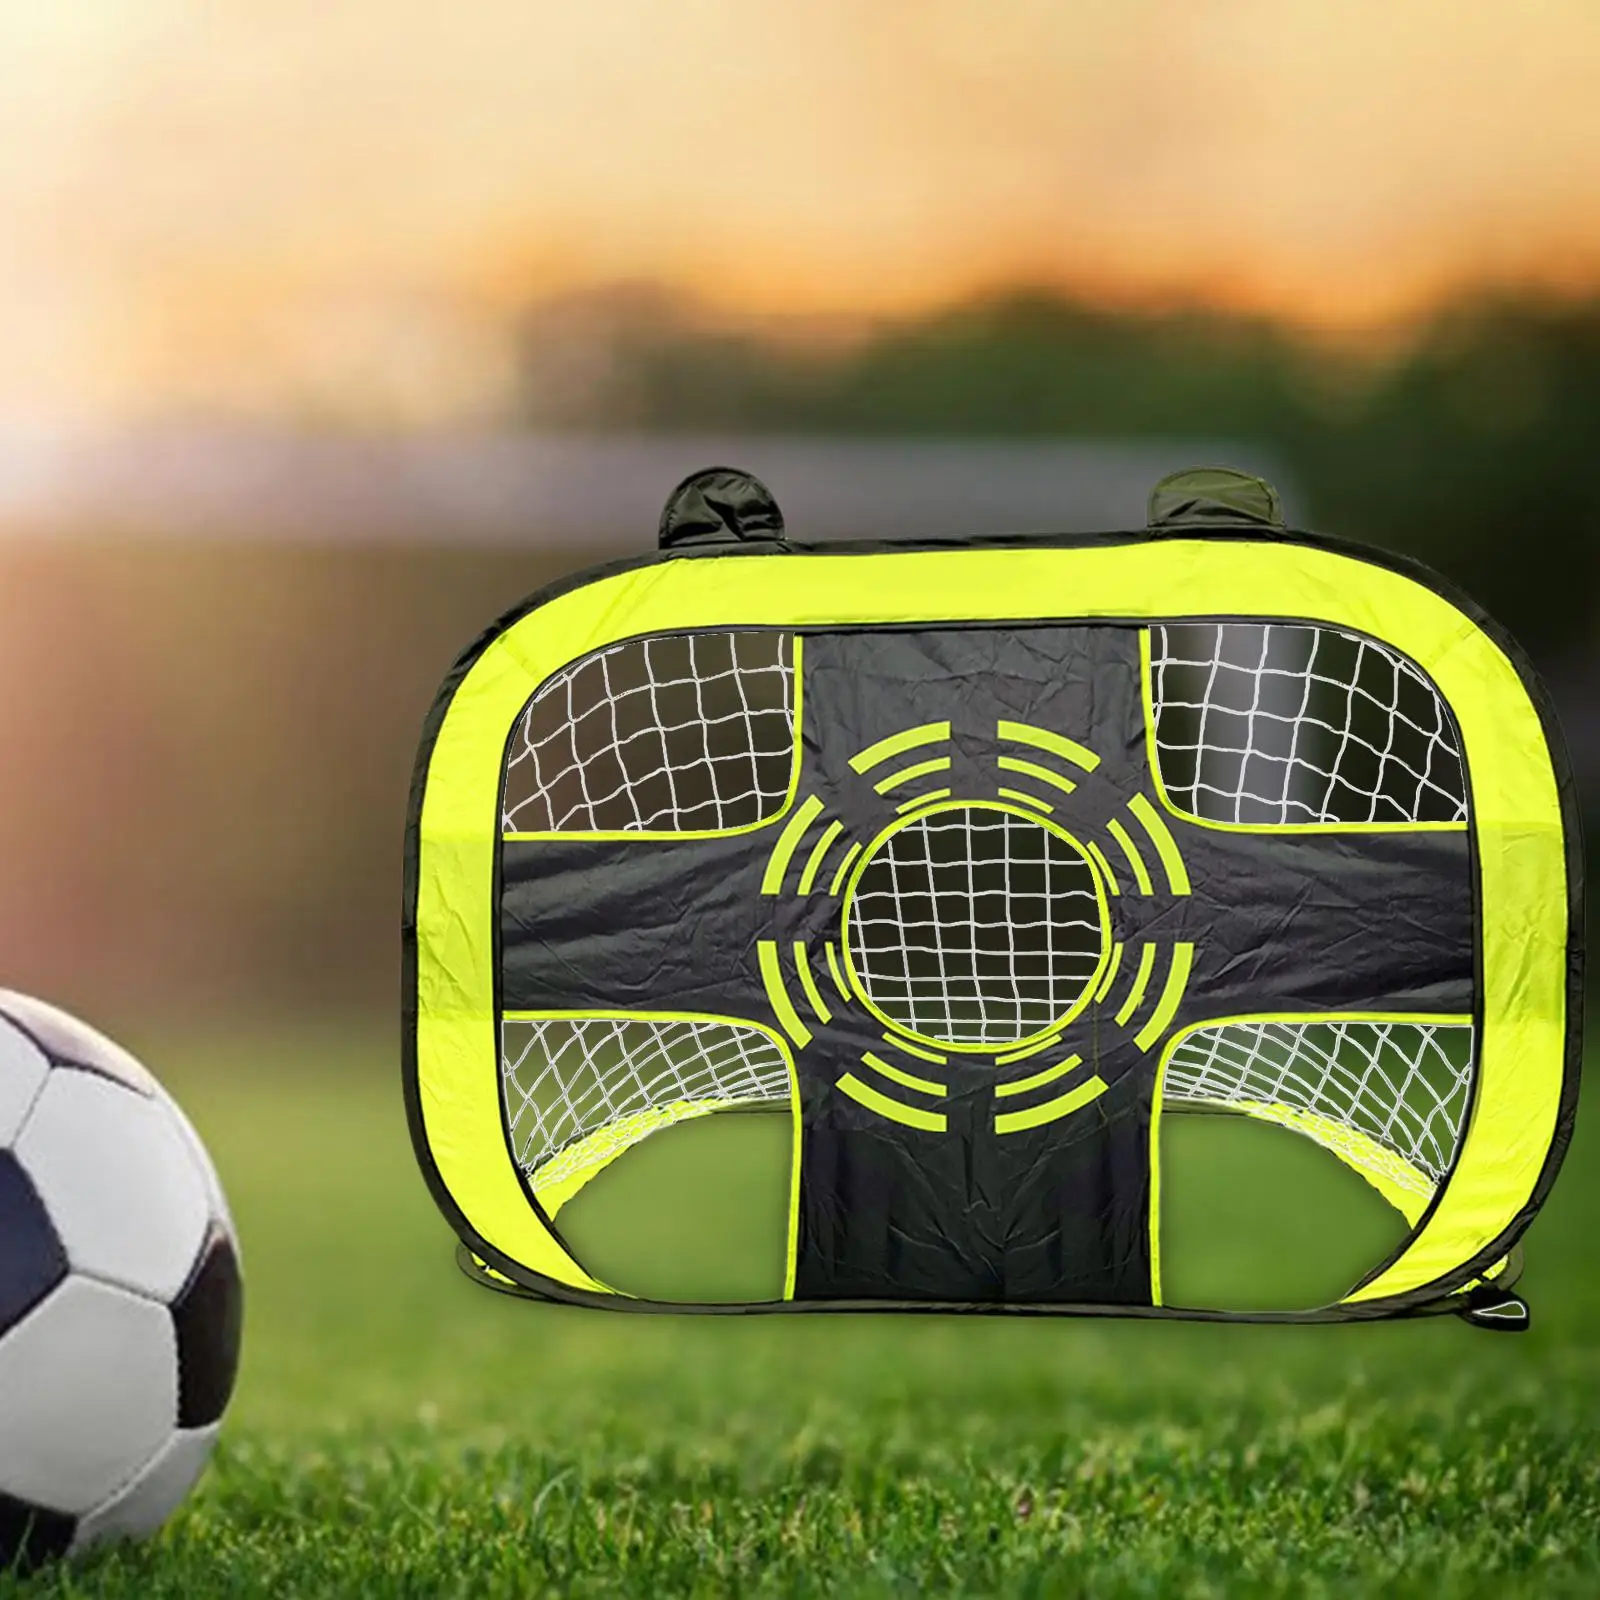 Kids Soccer Goal Pop up Foldable Children Football Toys Gift Lawn Activities Kick Trainer Easy Assembly for Kids Games Backyard